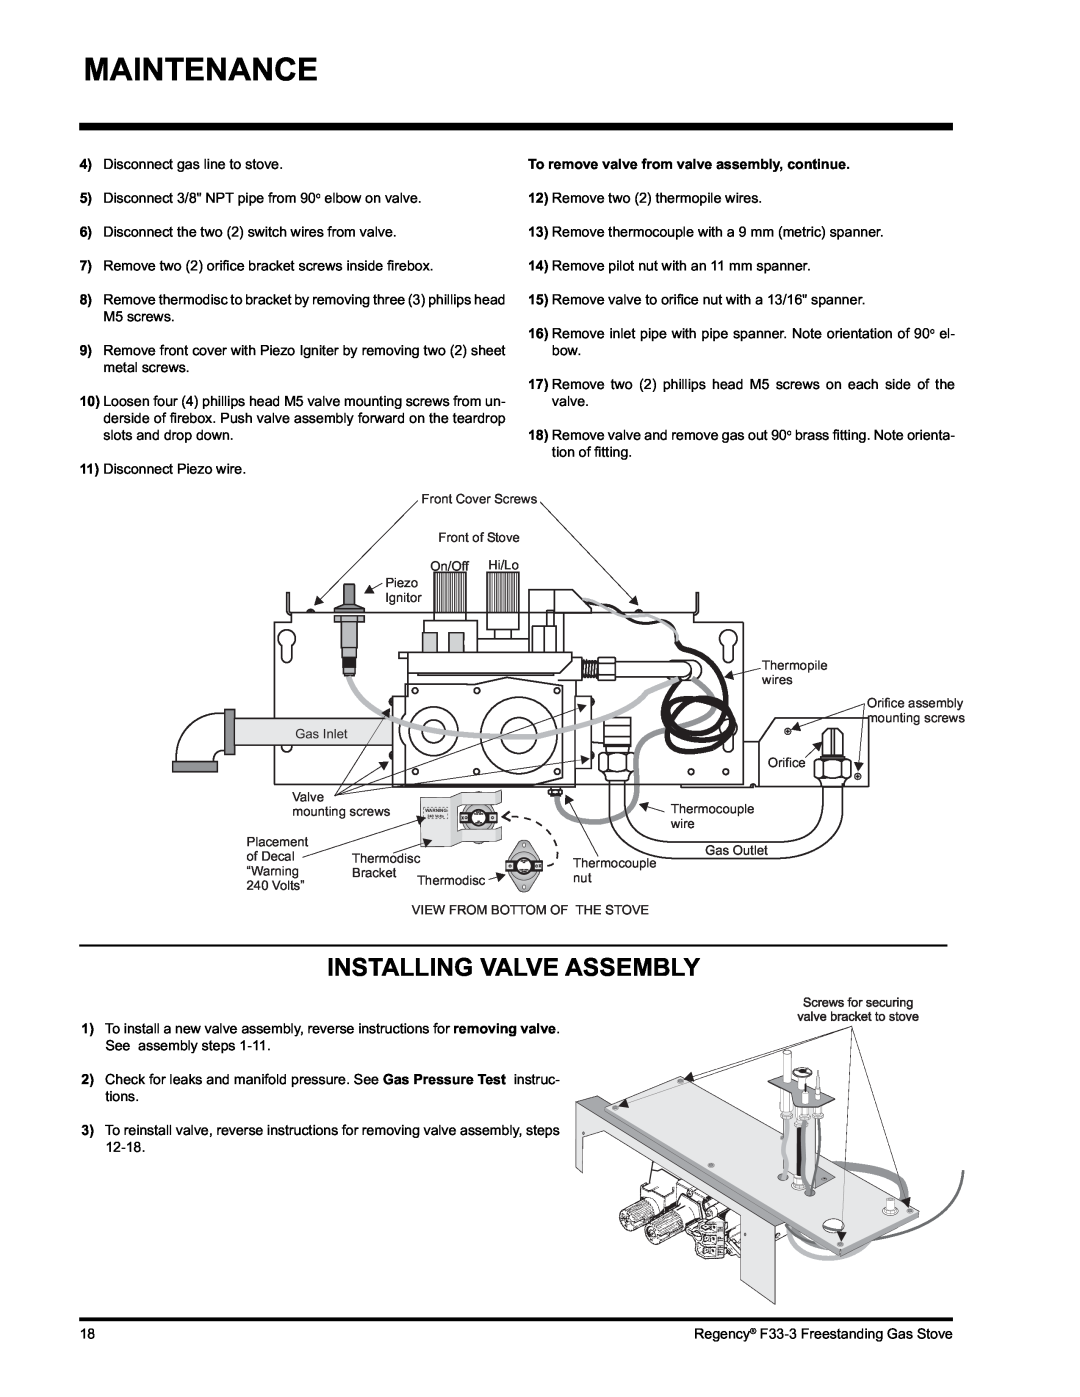 Regency Wraps F33 installation manual Installing Valve Assembly, Maintenance, To remove valve from valve assembly, continue 